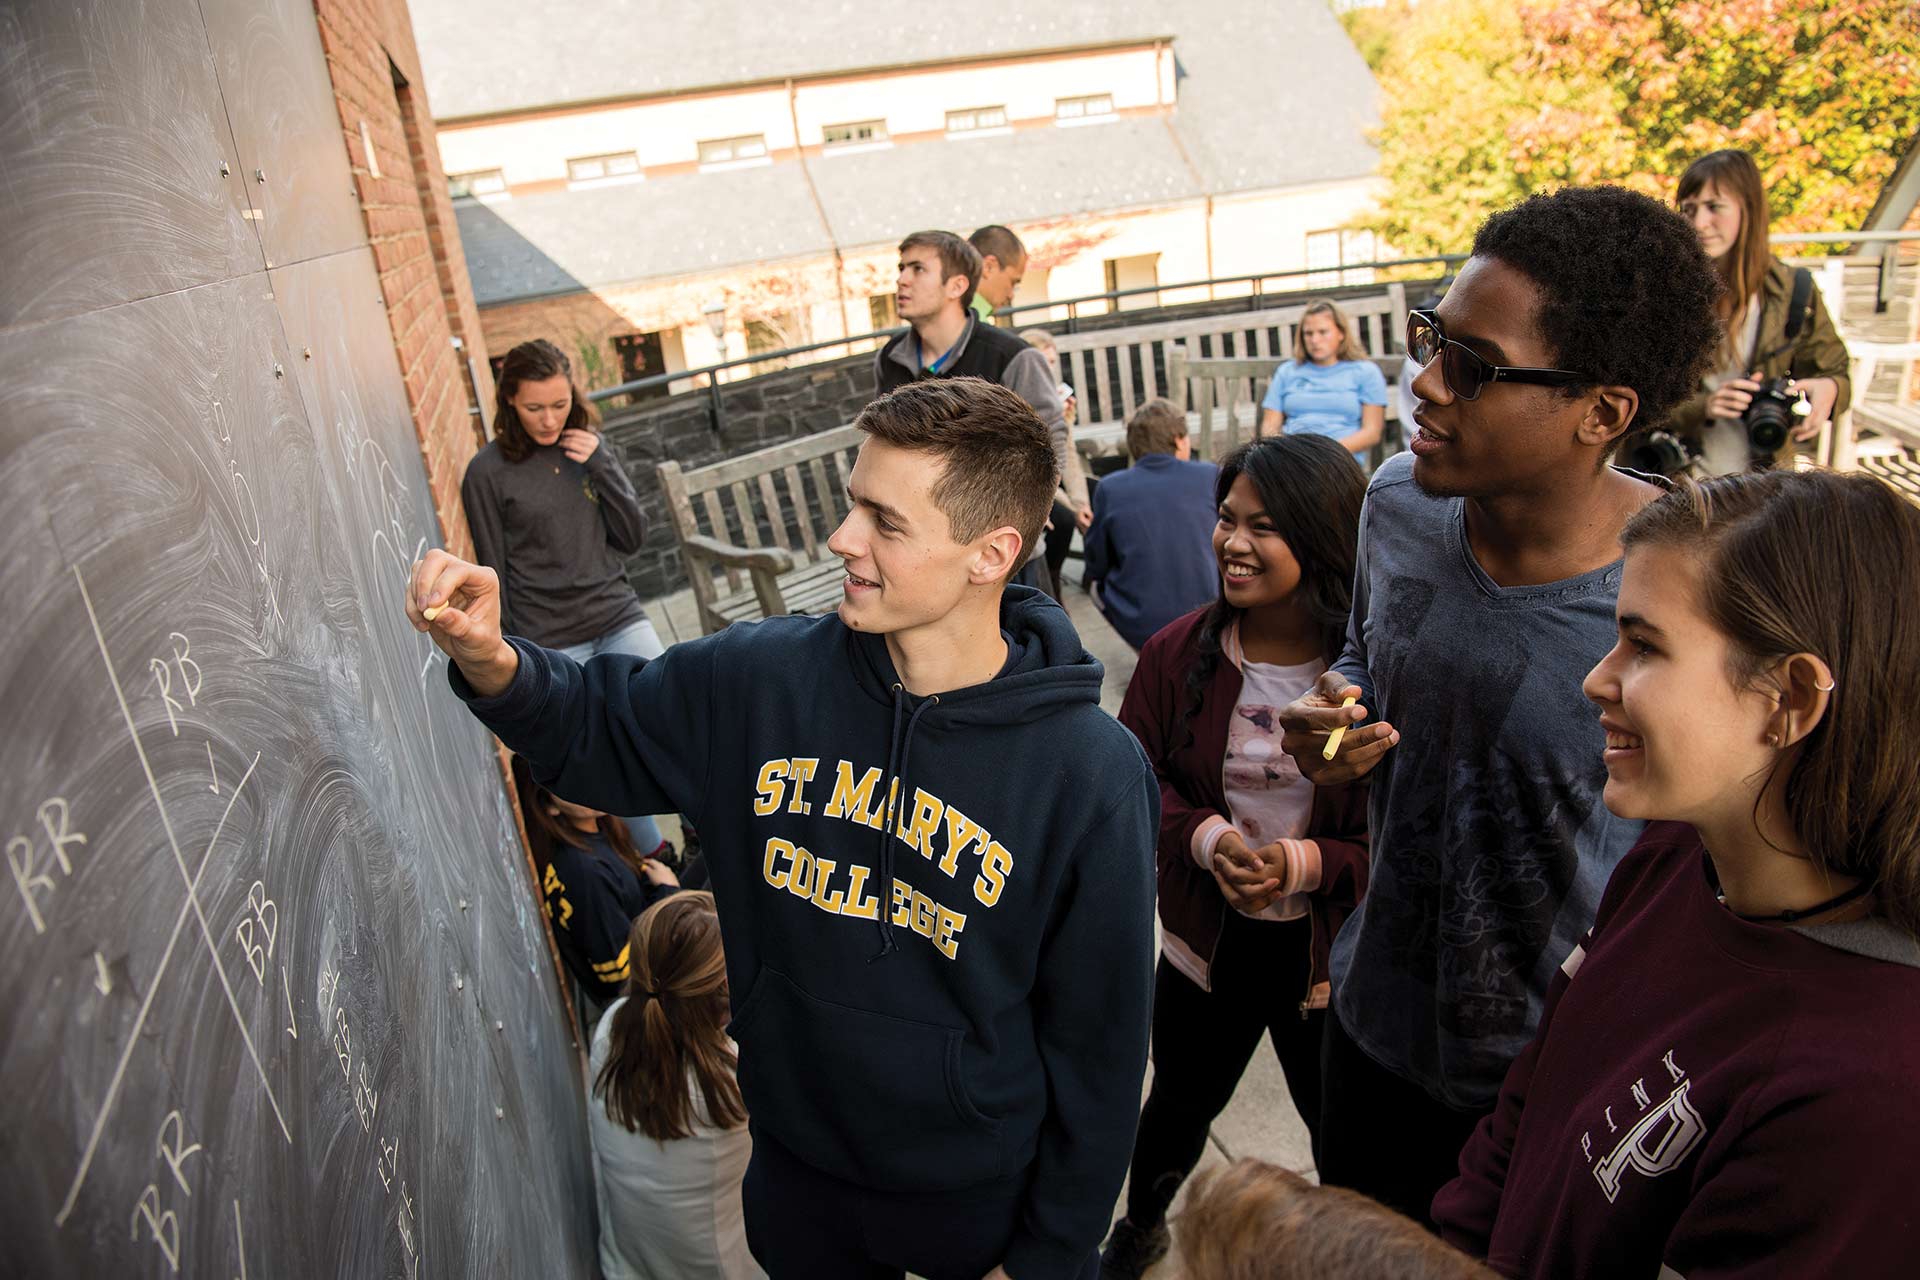 Students around an outdoor chalkboard working on a project.